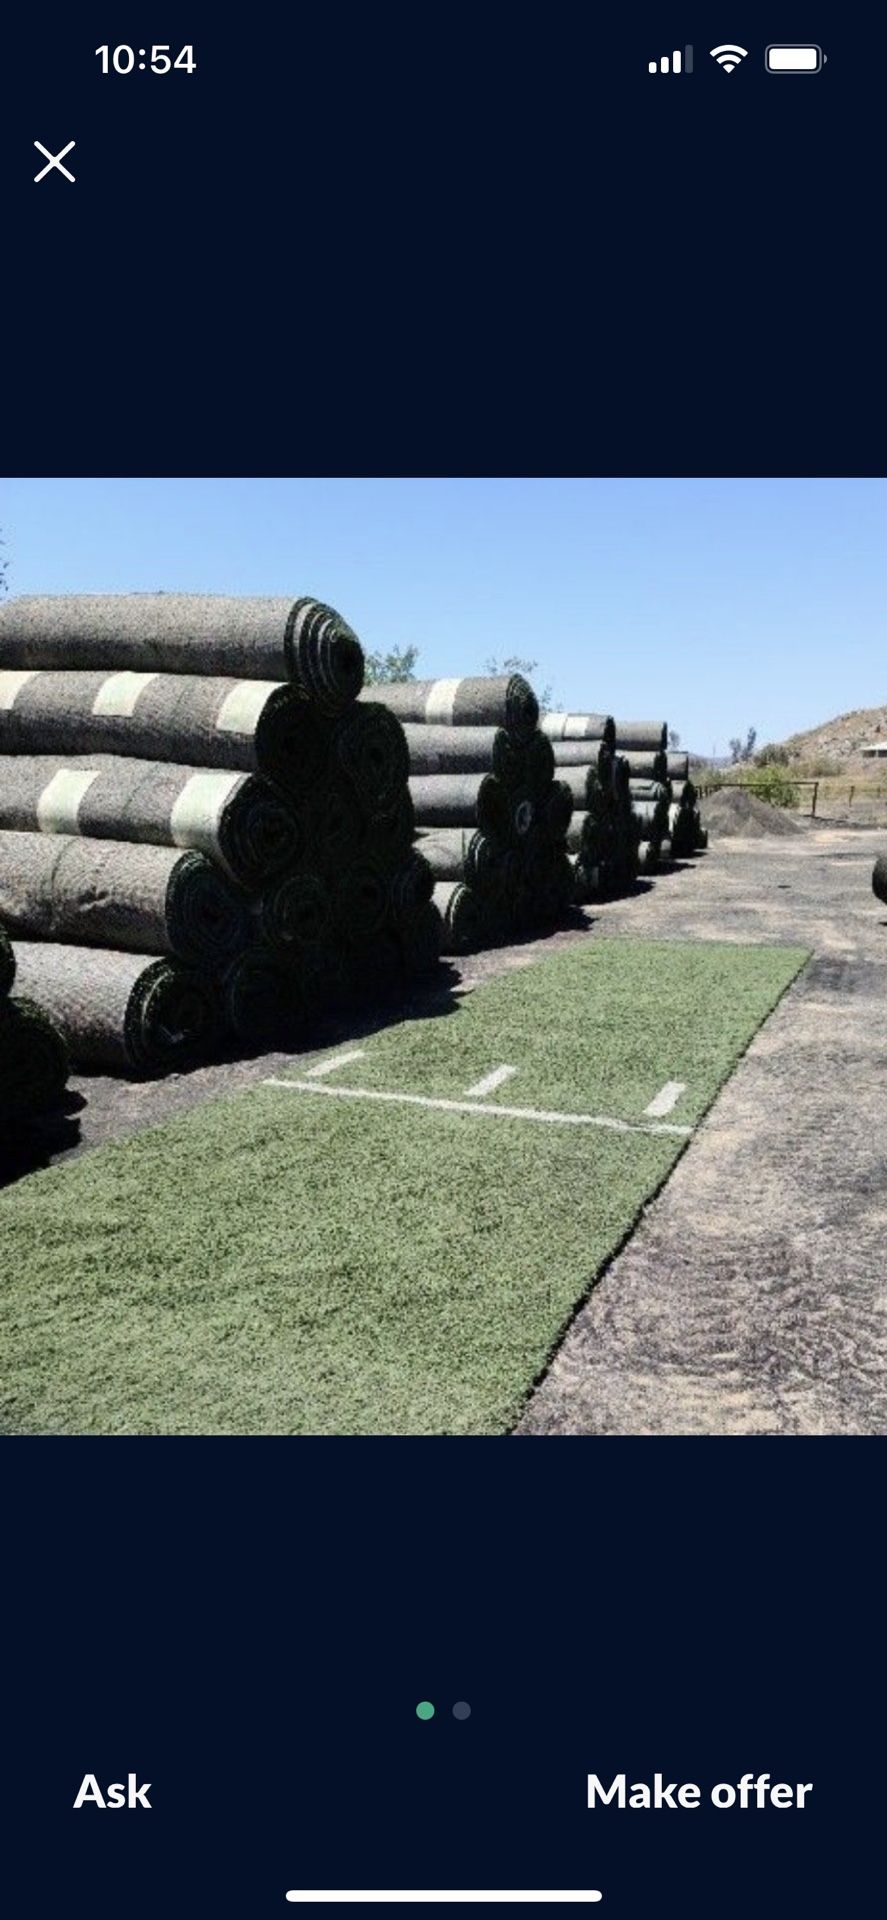 Recycled Artificial Turf